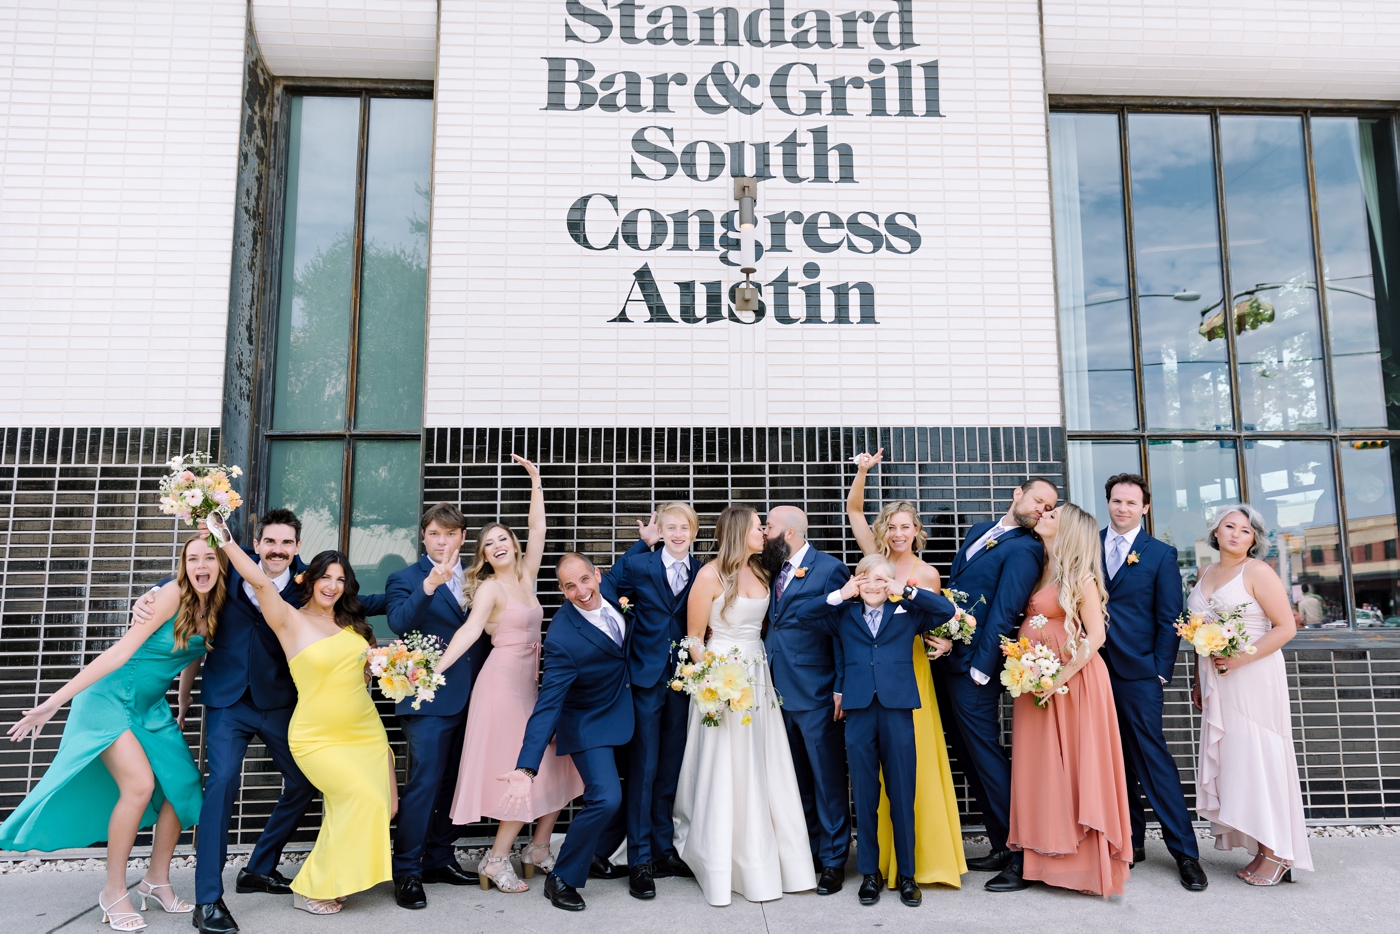 Wedding party pictures on South Congress Street at Standard Bar and Grill